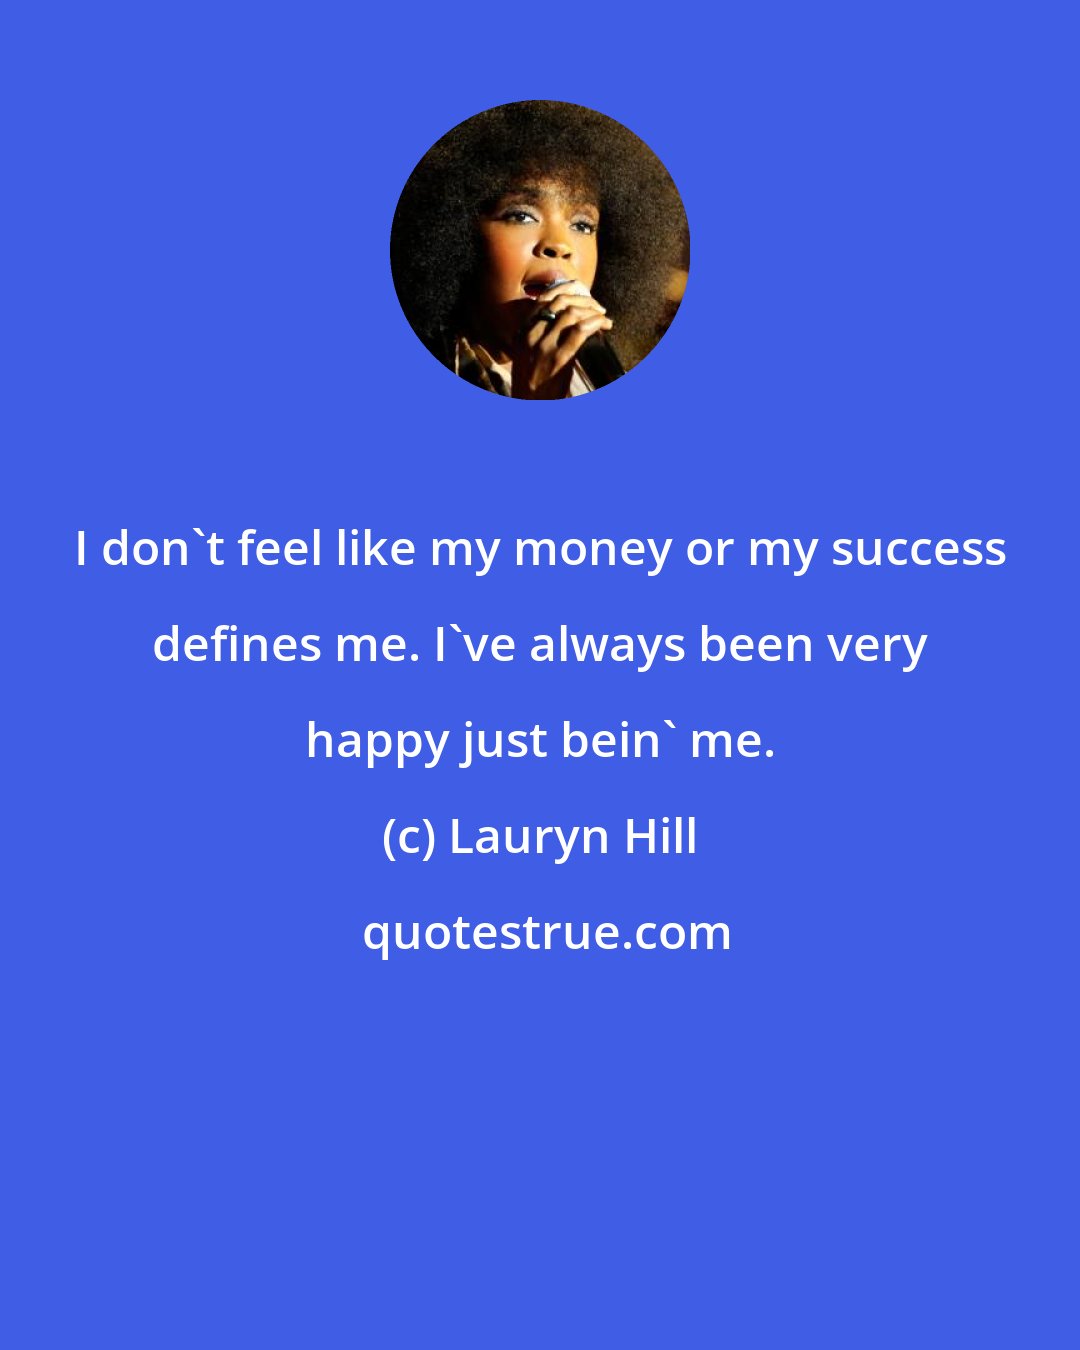 Lauryn Hill: I don't feel like my money or my success defines me. I've always been very happy just bein' me.